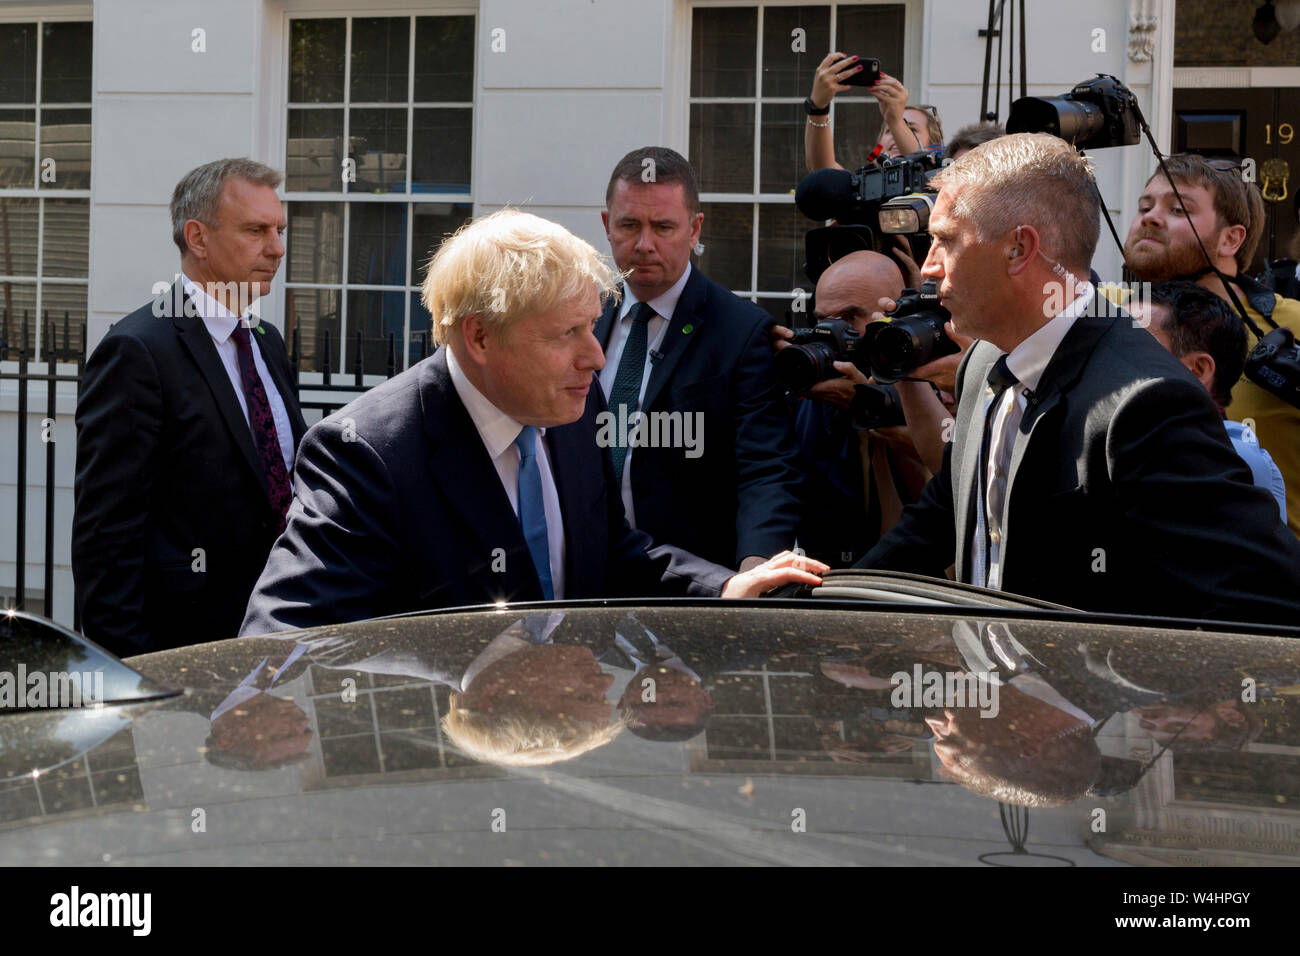 On the day that the Conservative Party elects its leader and the country's Prime Minister, Boris Johnson gets into his car to drive to the QE2 Centre nearby for the election result, on 23rd July 2019, in Westminster, London, England. Stock Photo